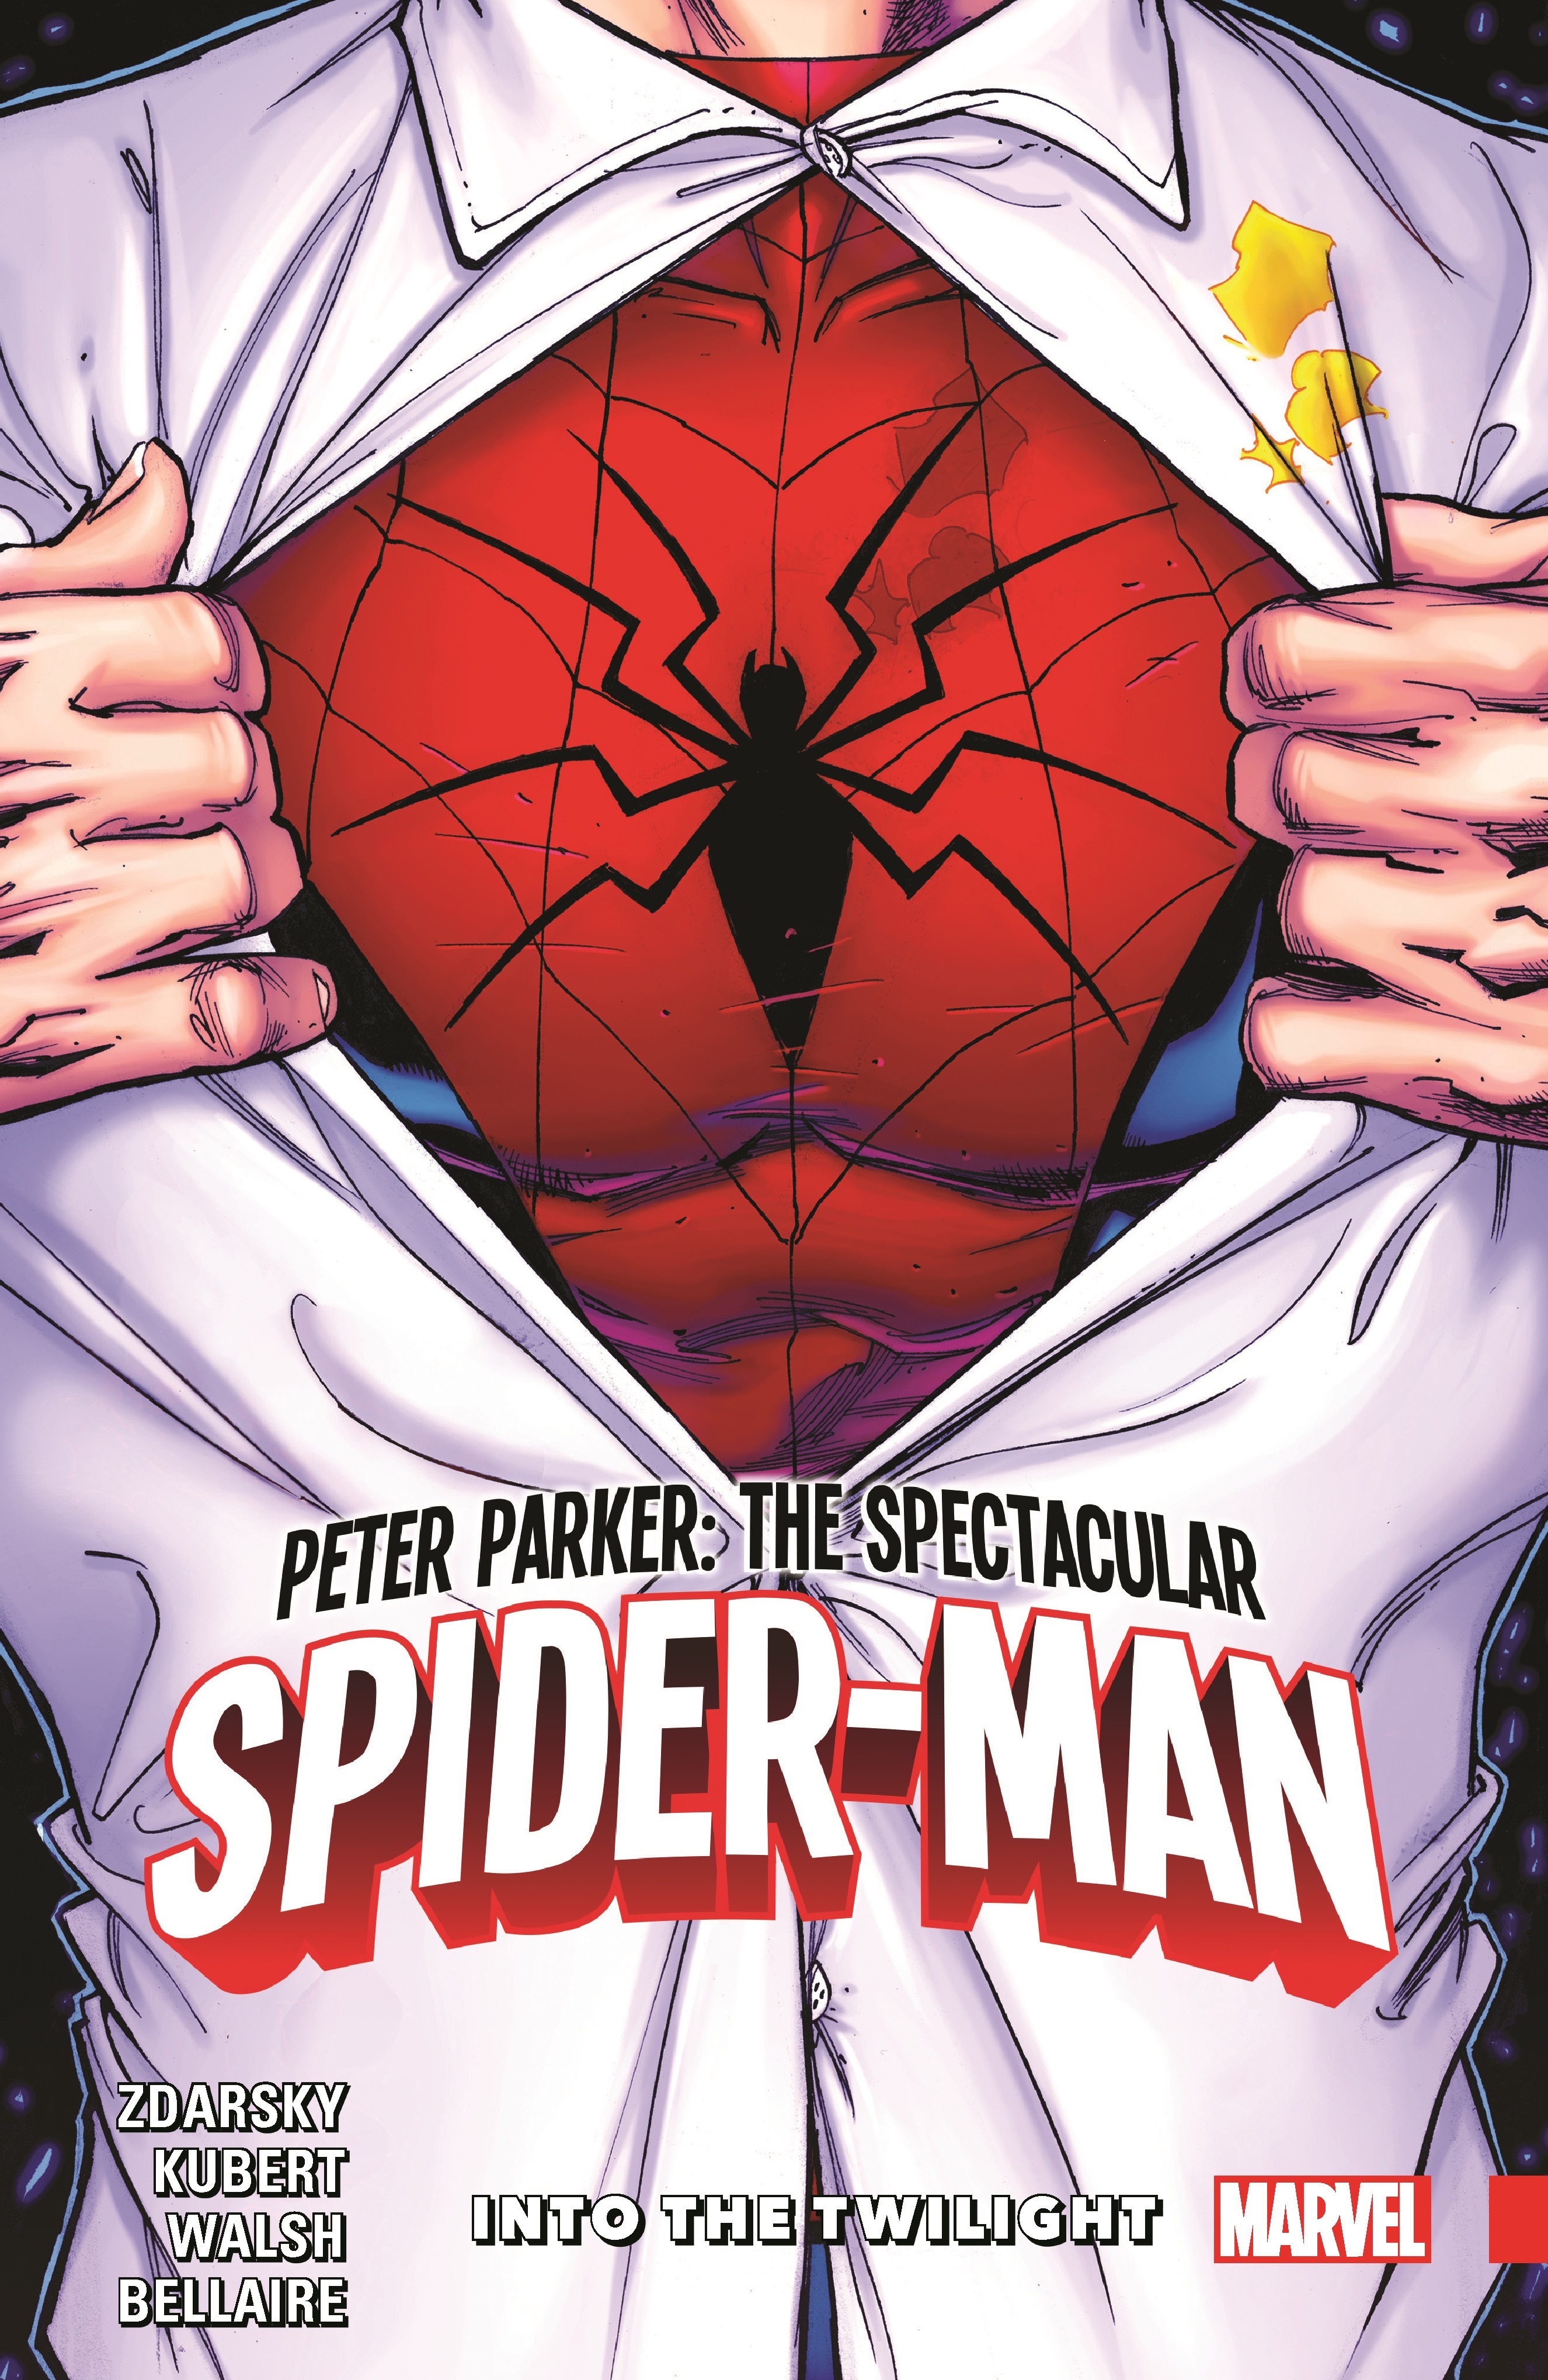 Peter Parker: The Spectacular Spider-Man Vol. 1 - Into the Twilight (Trade Paperback)